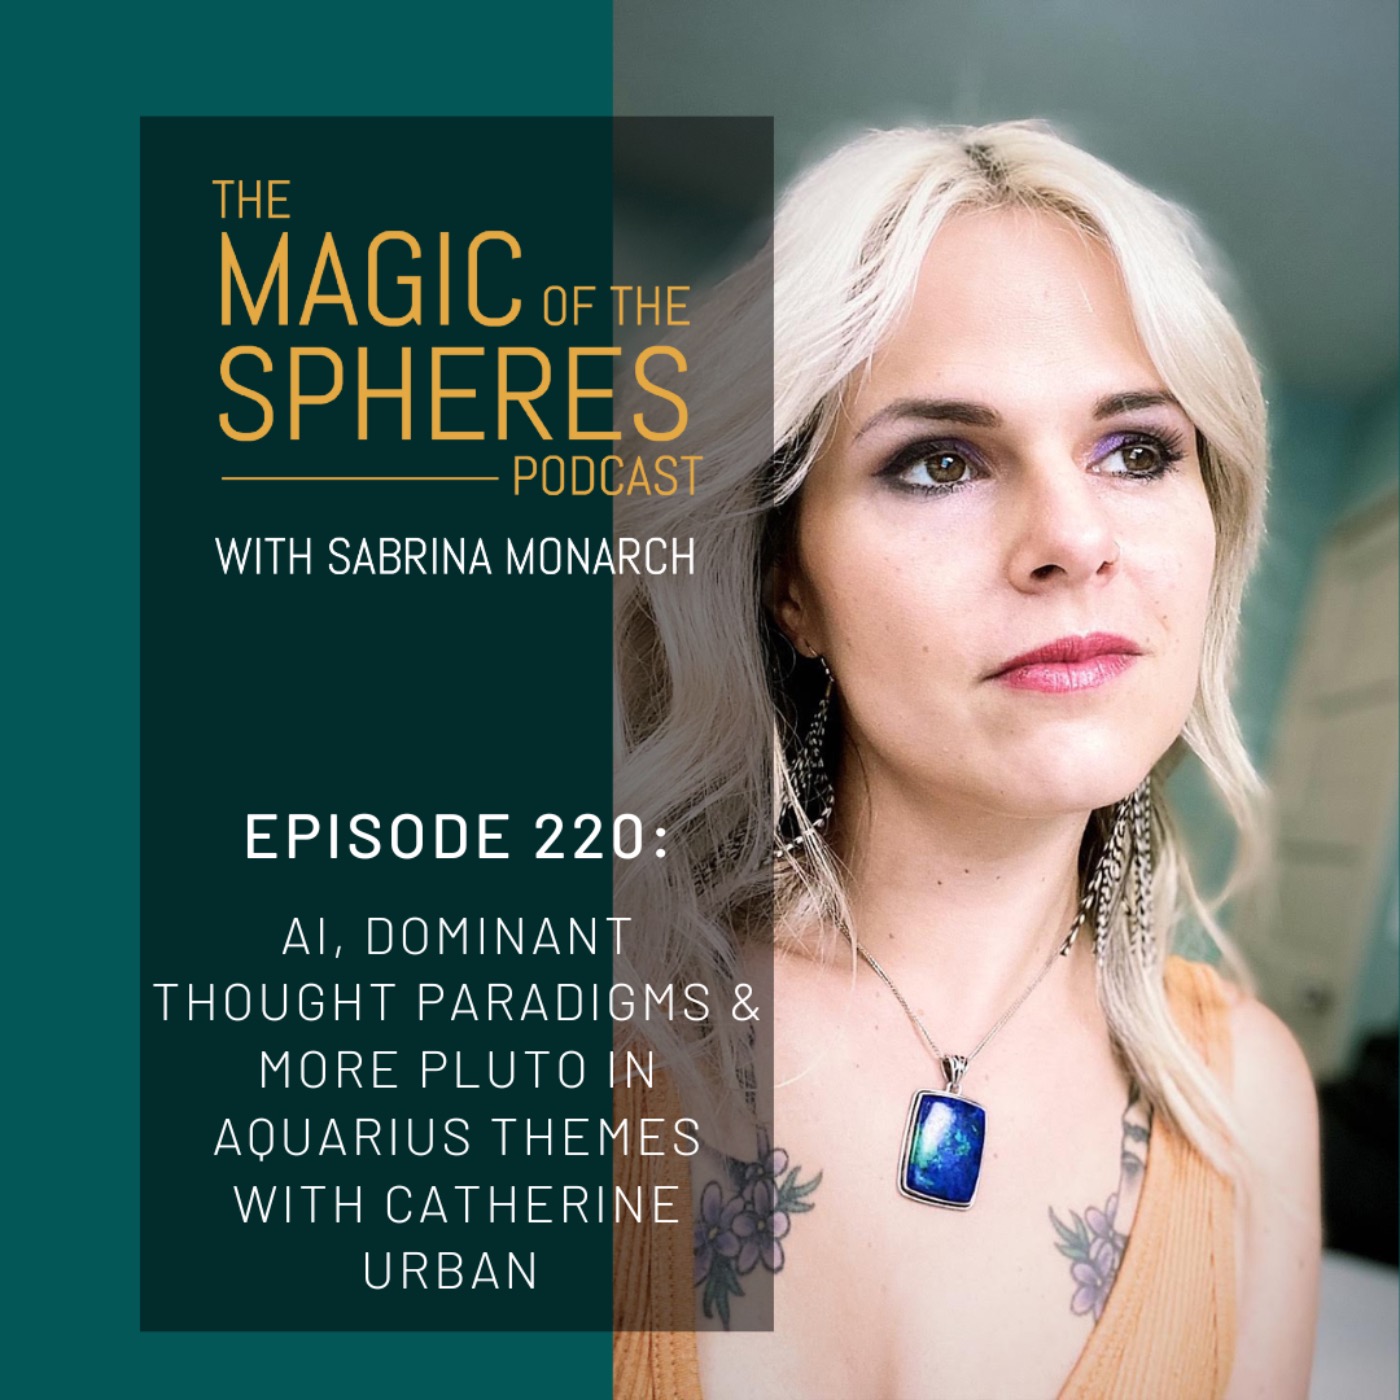 AI, Dominant Thought Paradigms & more Pluto in Aquarius themes with Catherine Urban